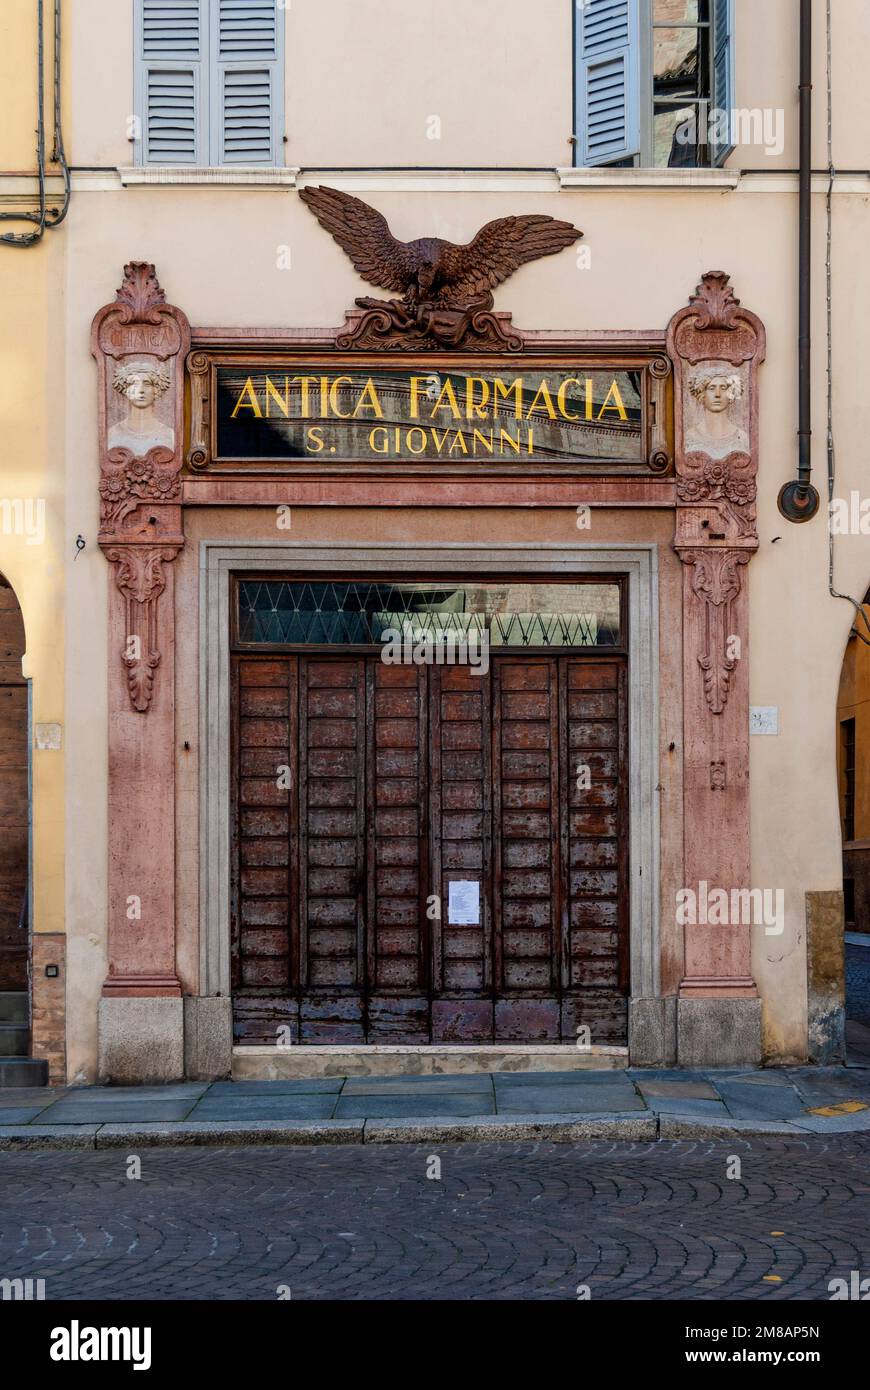 Façade of Old apothecary of Saint John, former historic pharmacy now a museum, in Parma city center, inside the abbey of San Giovanni Evangelista. Stock Photo